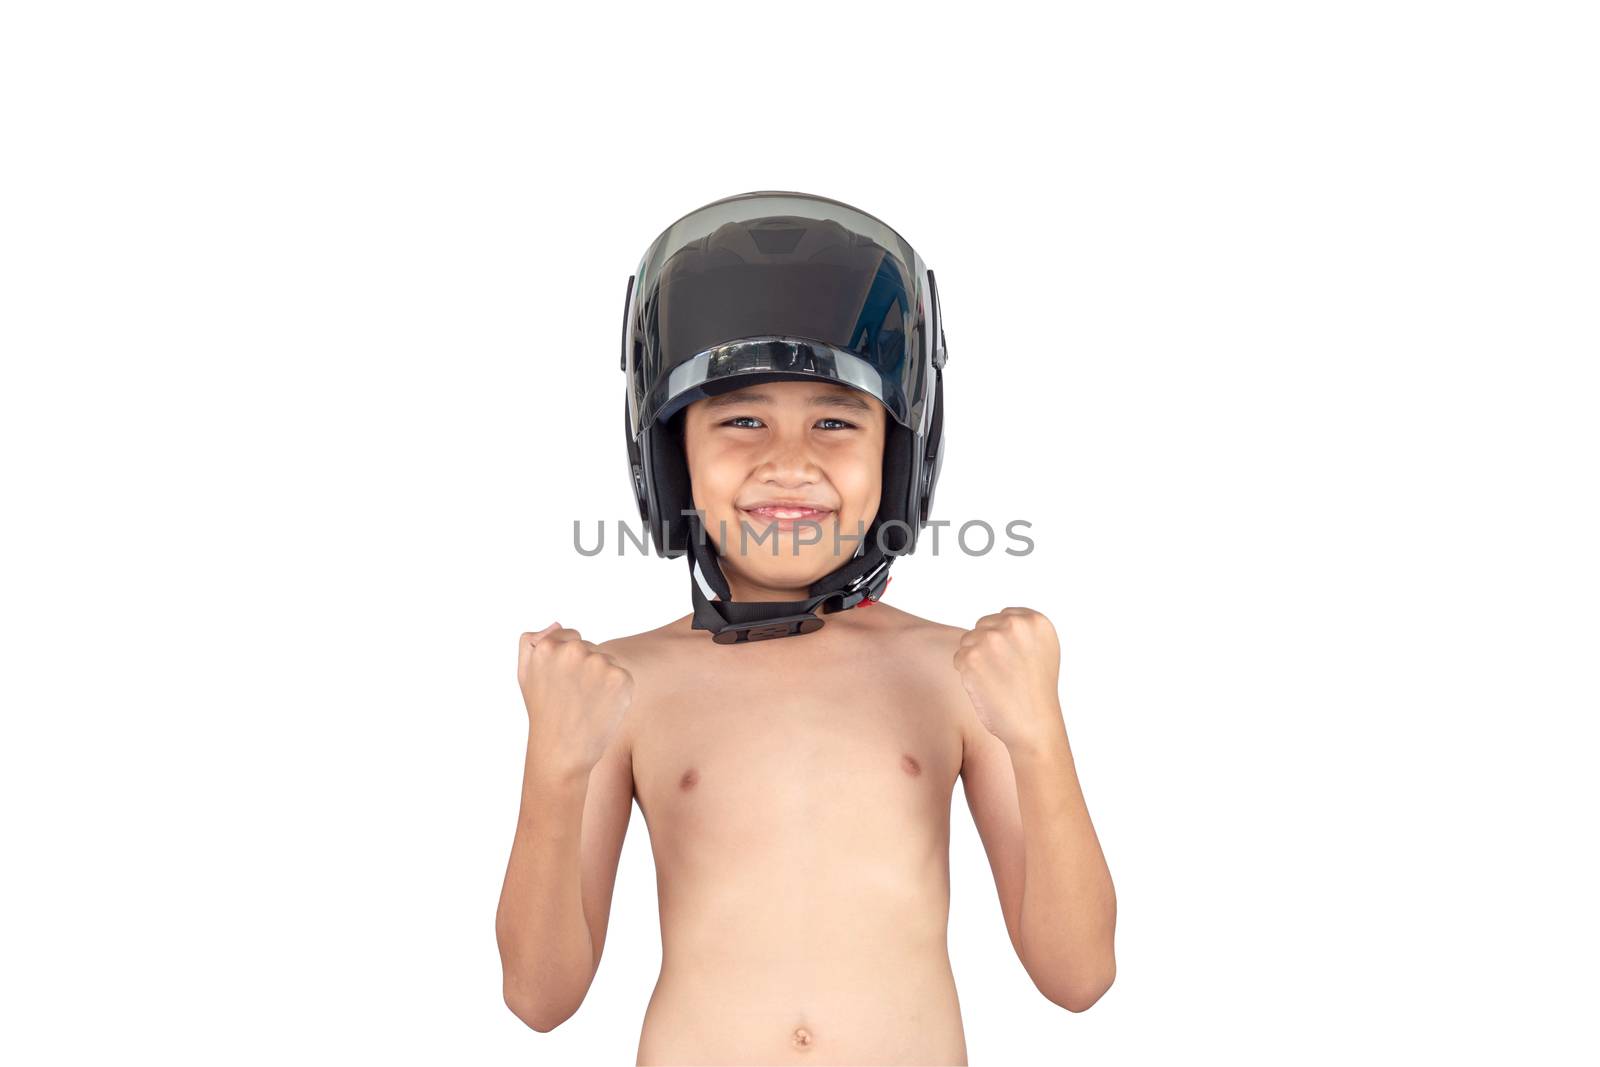 A boy wearing a motorcycle helmet stands smiling but without a shirt isolated on white background.